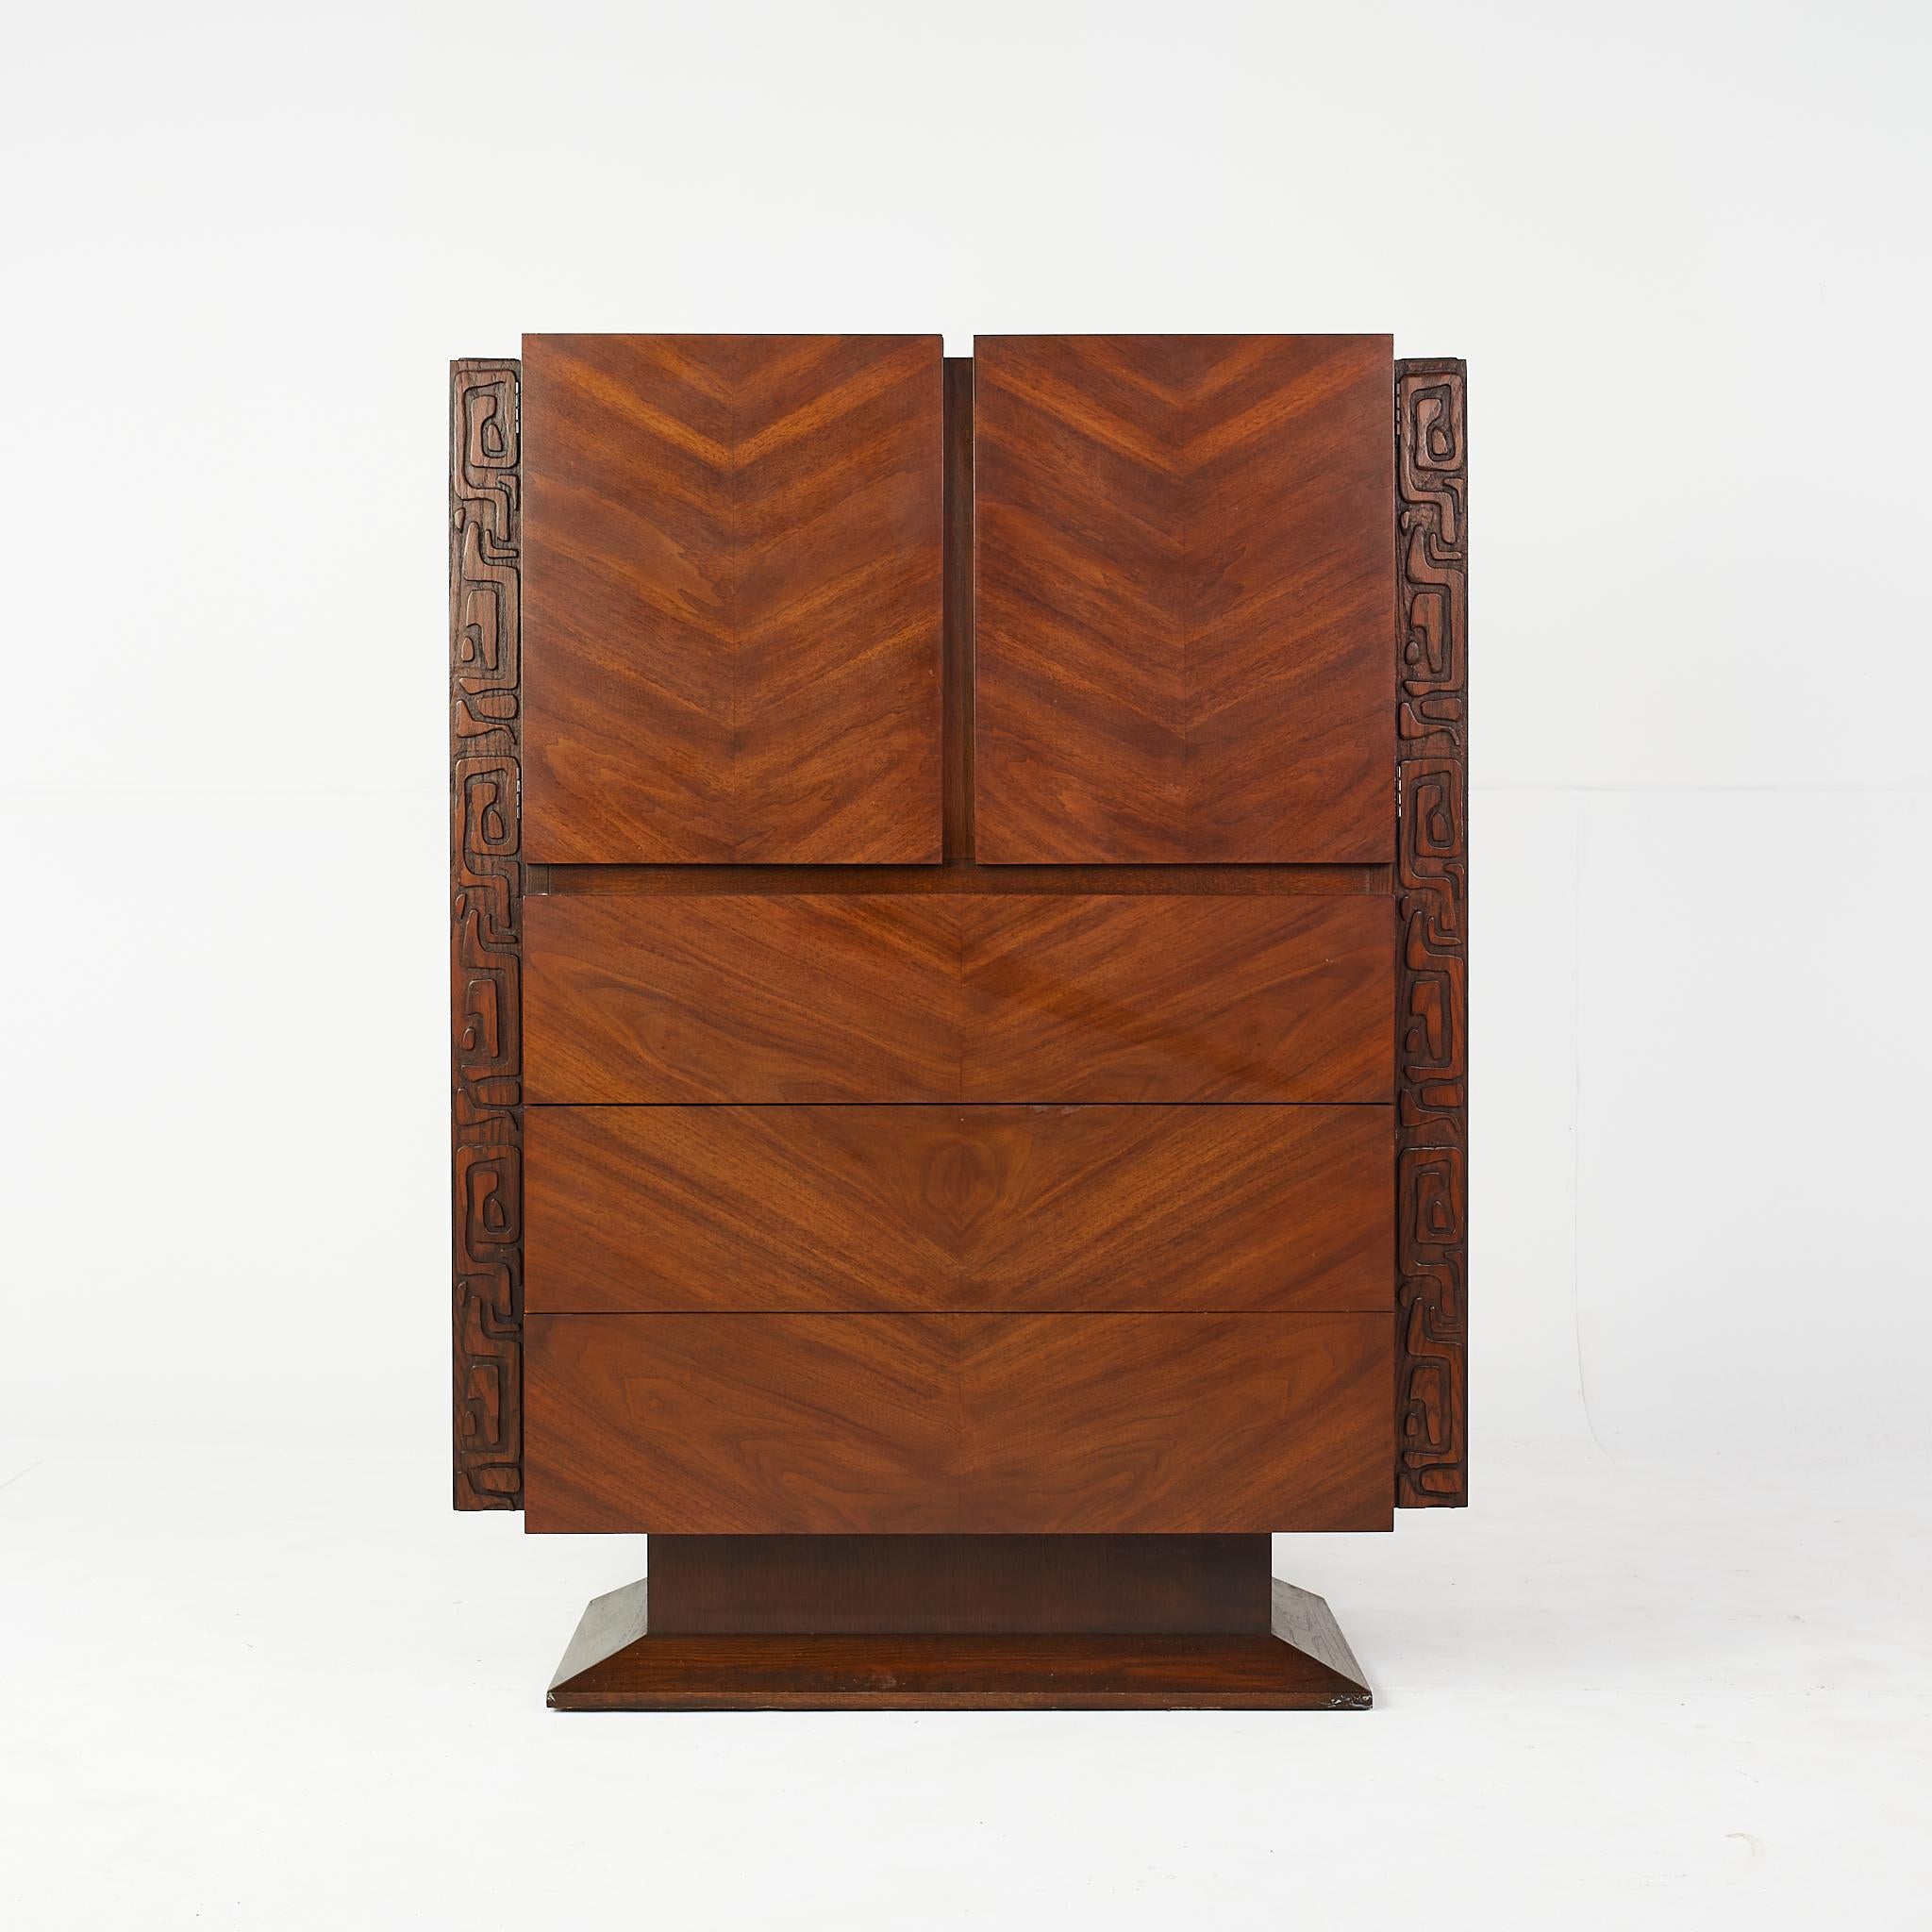 United mid century Tiki Brutalist highboy dresser

This dresser measures: 41 wide x 19 deep x 54 inches high

All pieces of furniture can be had in what we call restored vintage condition. That means the piece is restored upon purchase so it’s